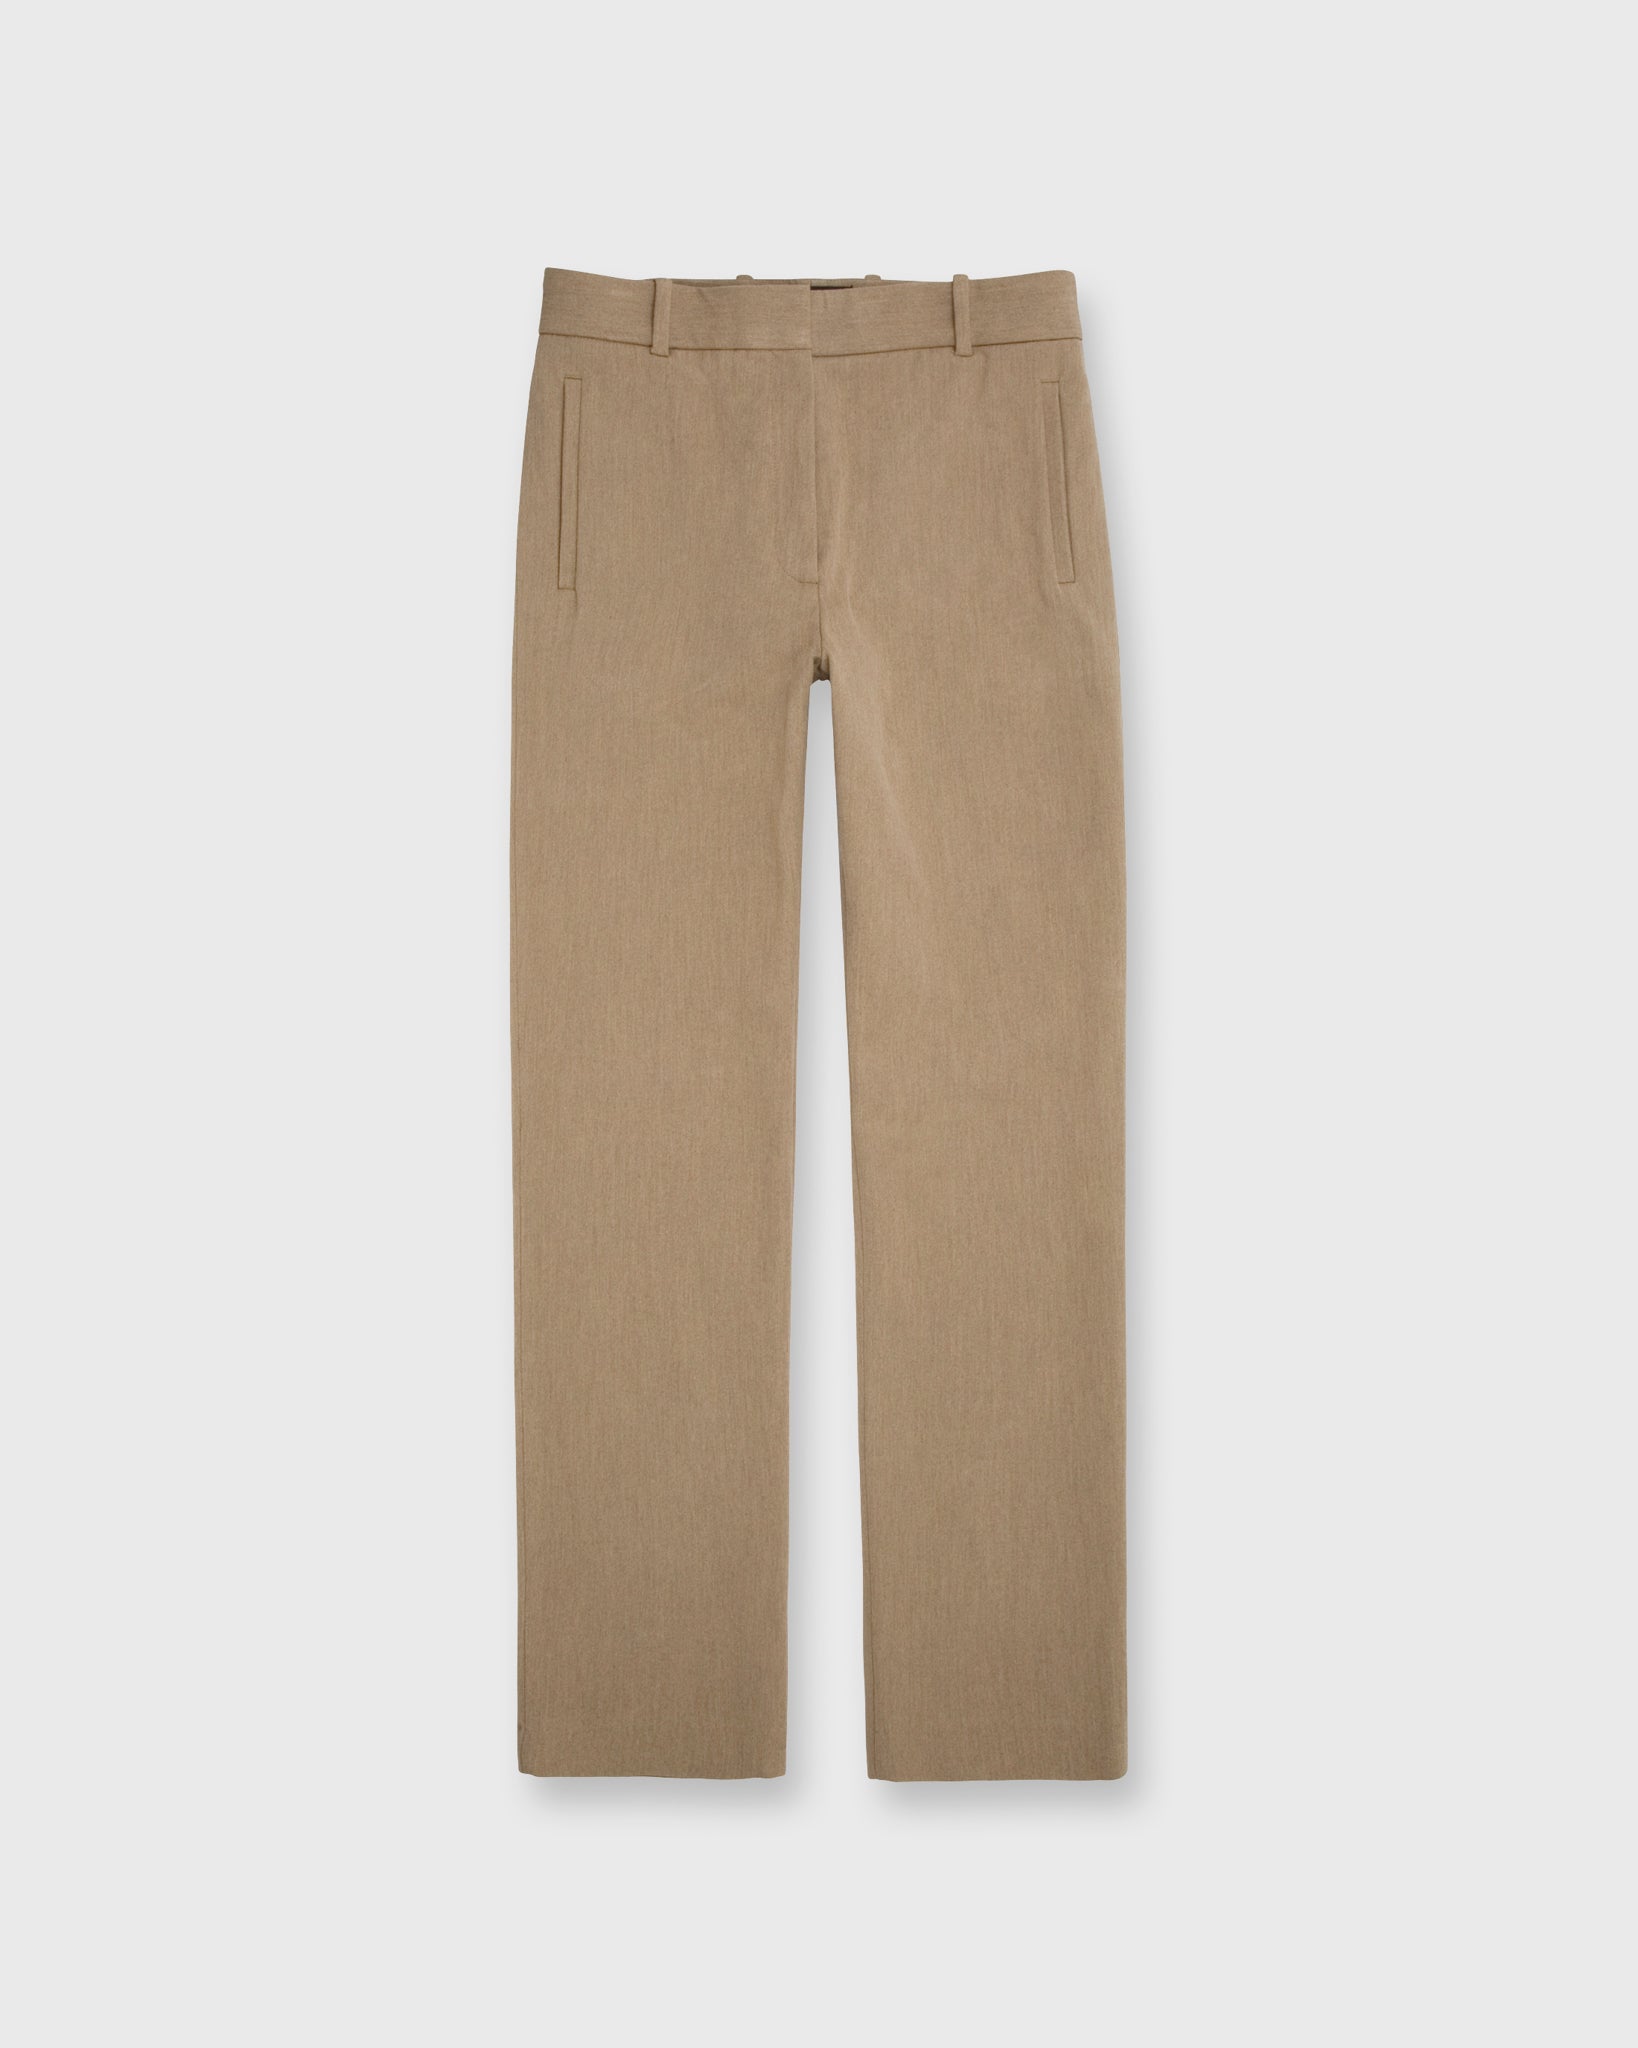 New Eliston Pant in Taupe